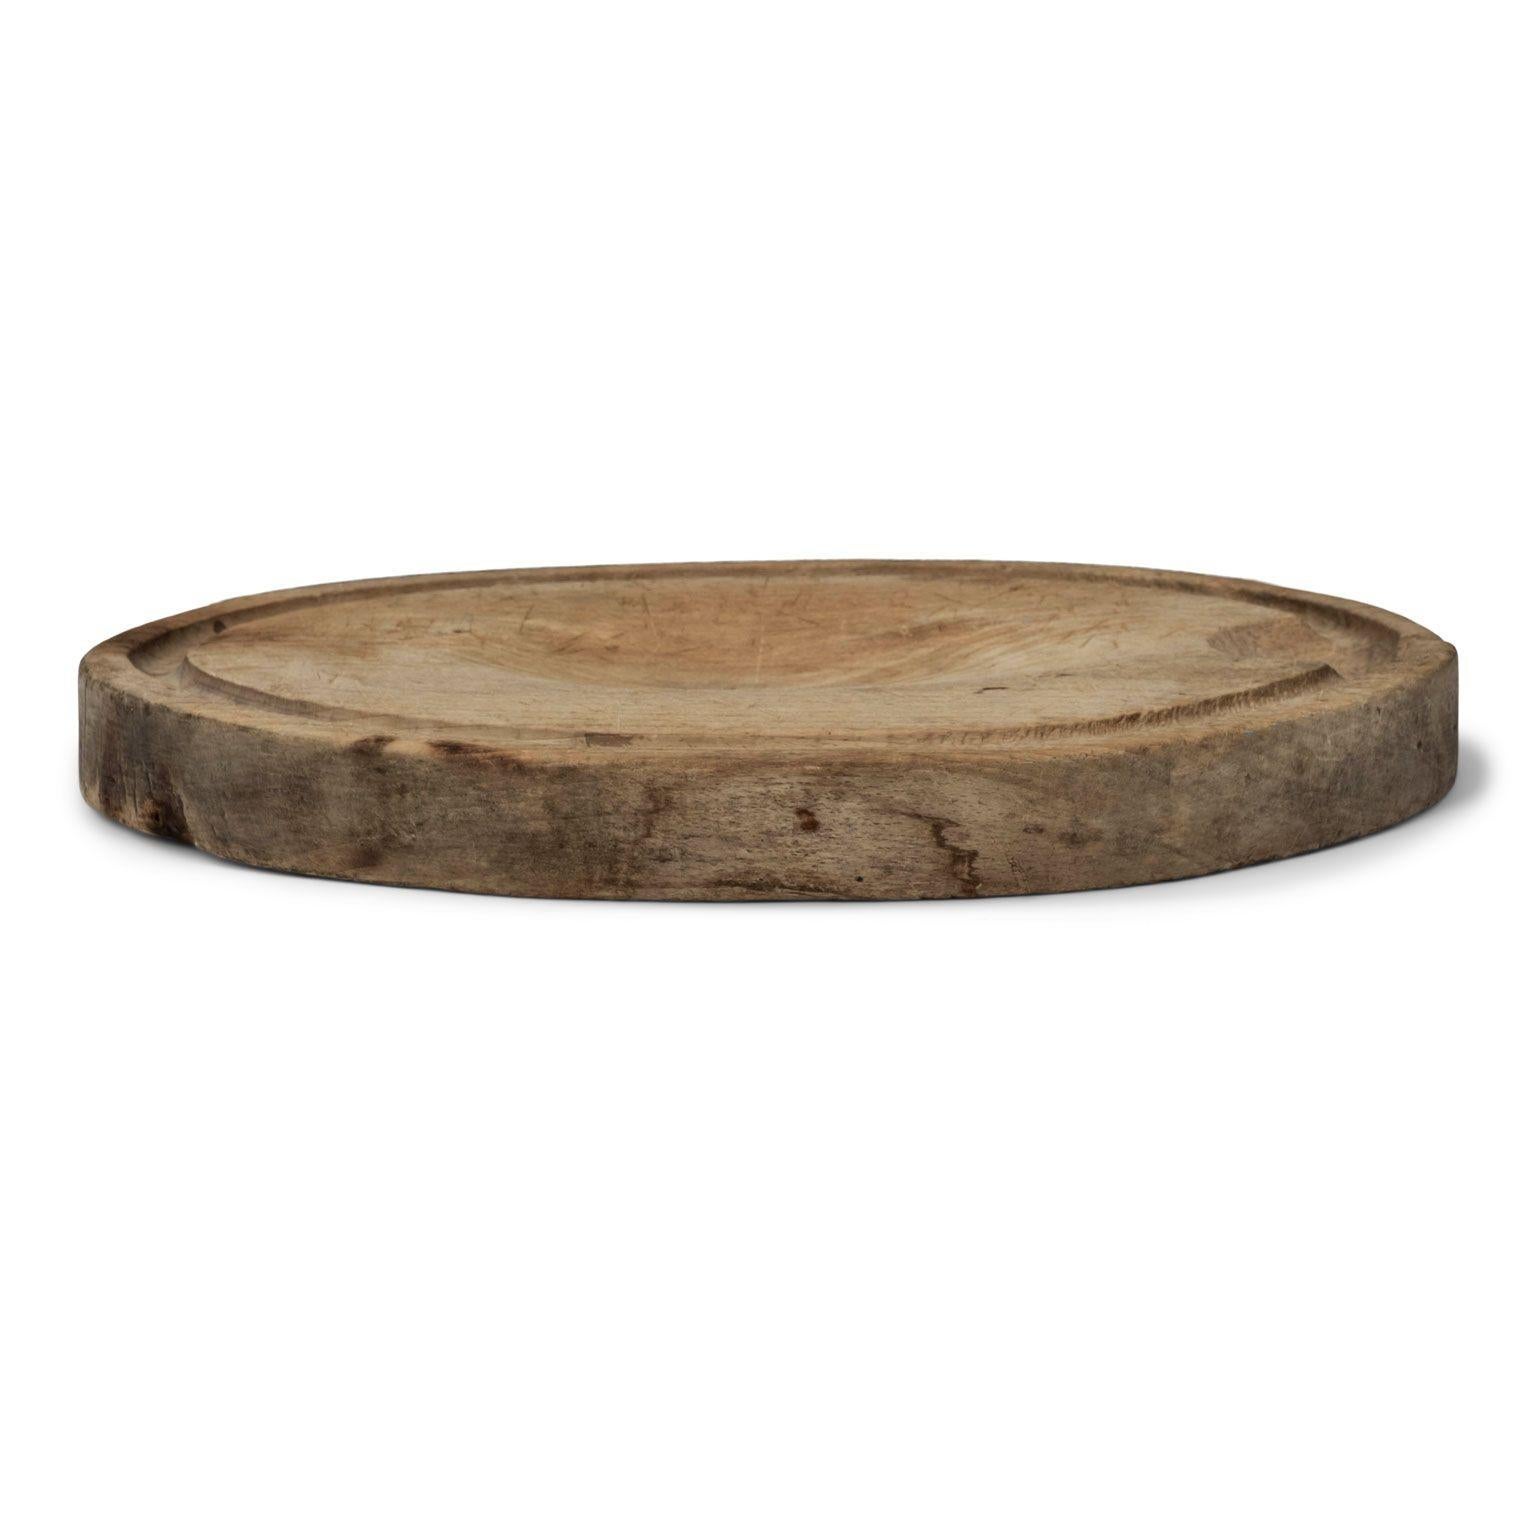 19th Century Thick Oval-Shaped Cutting Board